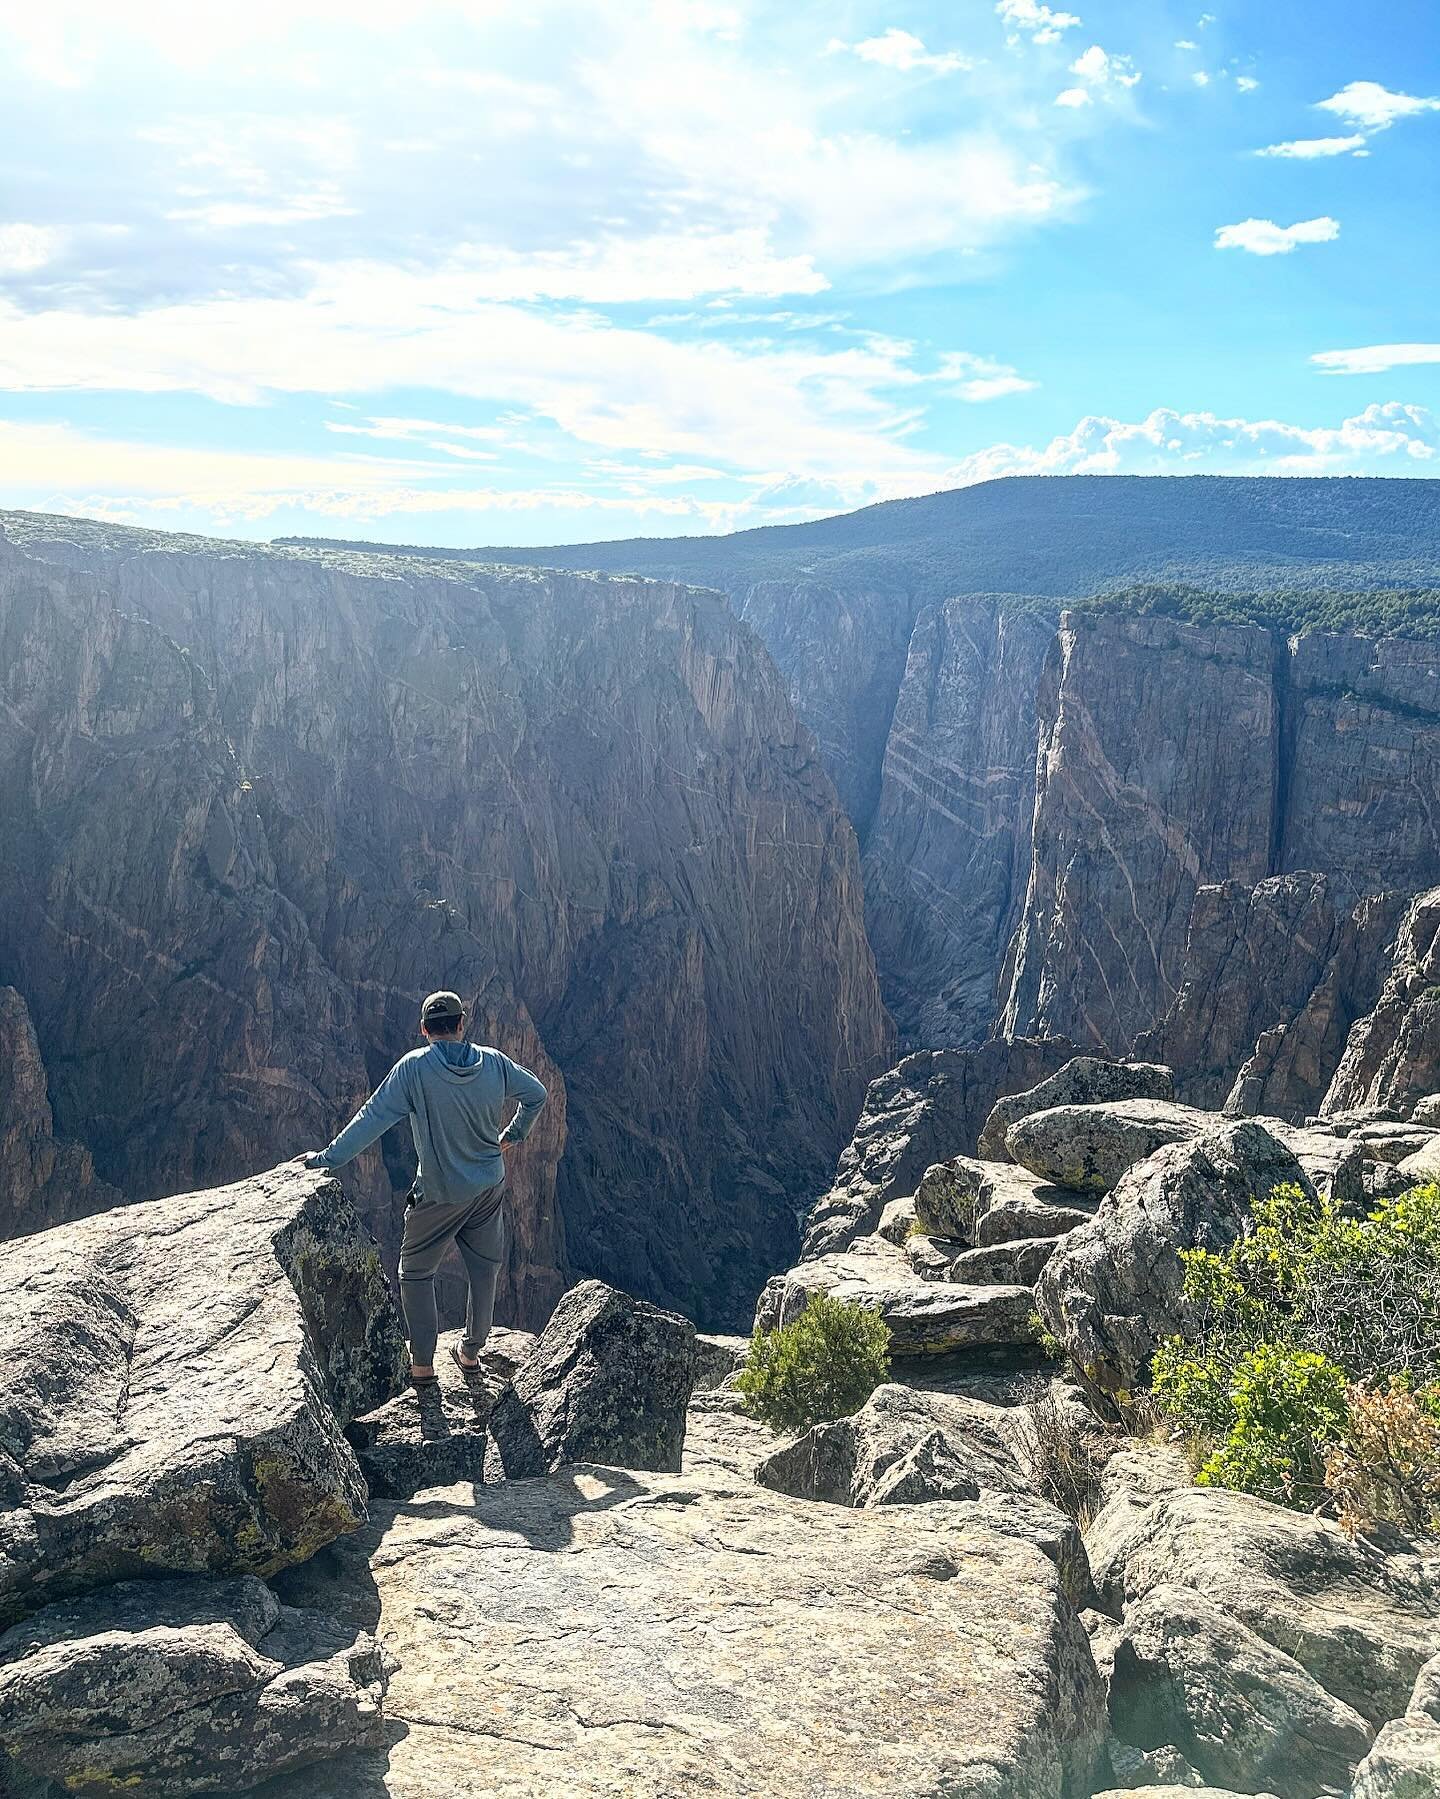 🌎🌍🌏Happy Earth Day🌎🌏🌍
A day late&hellip; but hey, everyday is Earthday!

Here are a couple of snaps from the Black Canyon of the Gunnison River from our trips there in 2023.

If you are into geology, there&rsquo;s a lot to see here!
Over the la